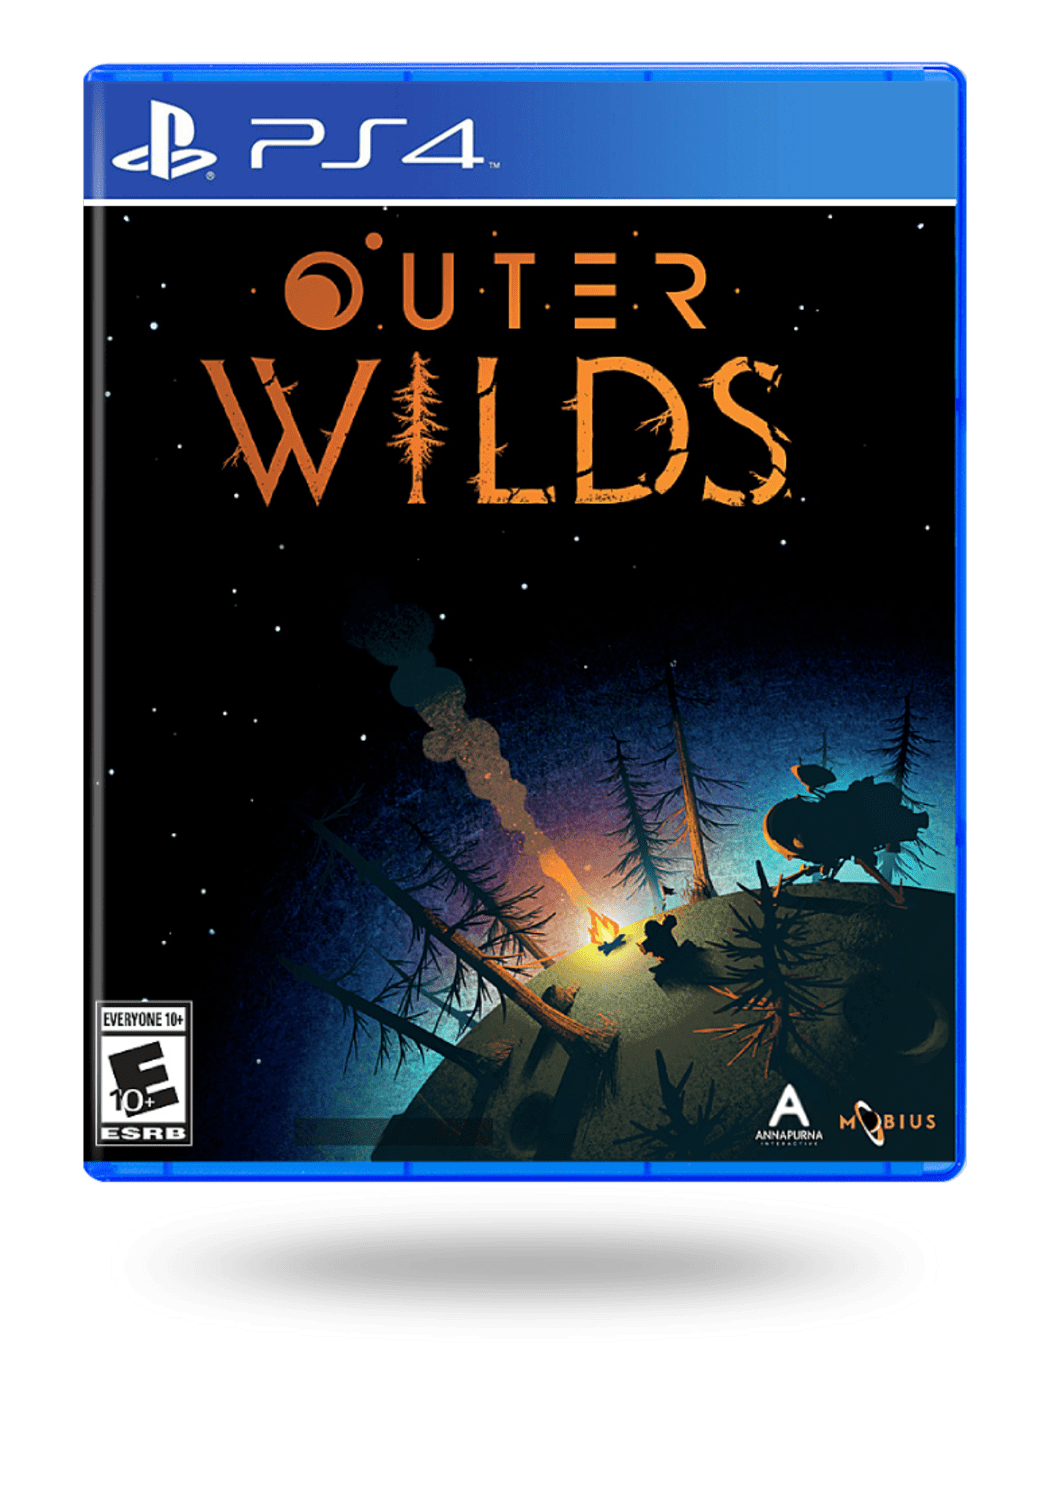 Outer Wilds  Download and Buy Today - Epic Games Store